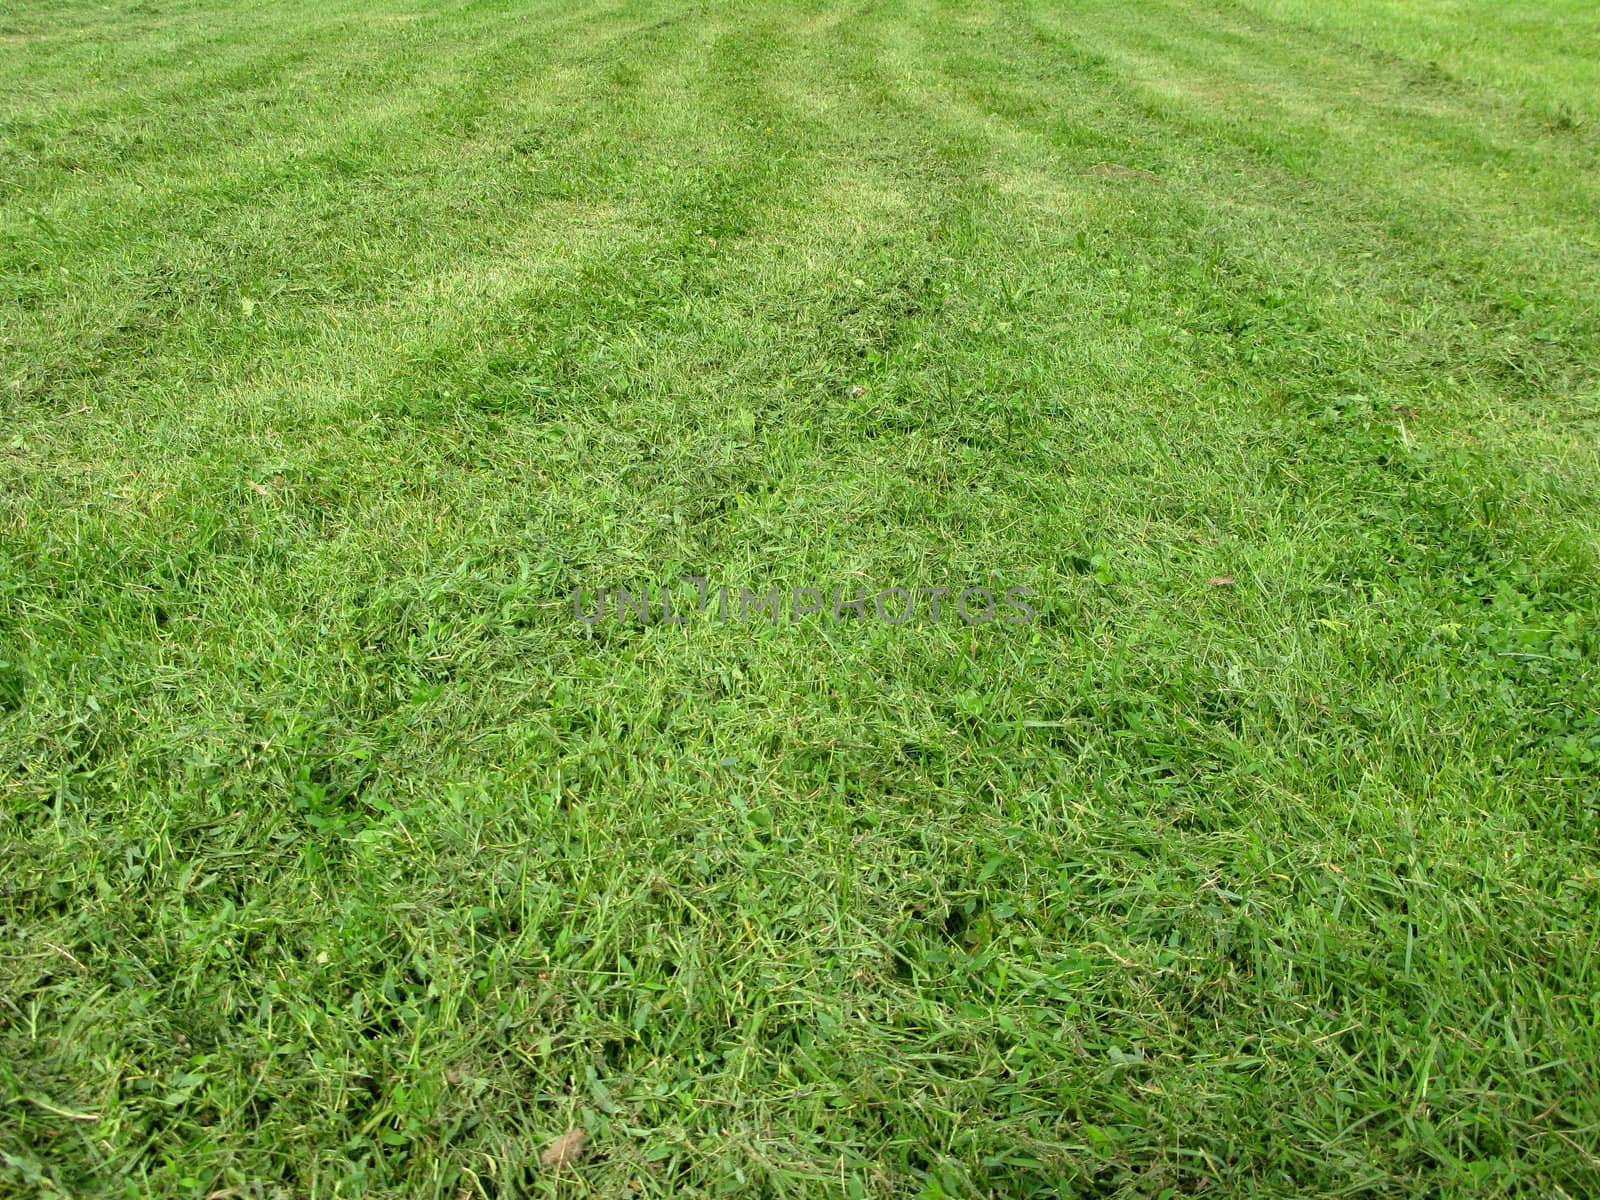 Mowing green grass texture on lawn